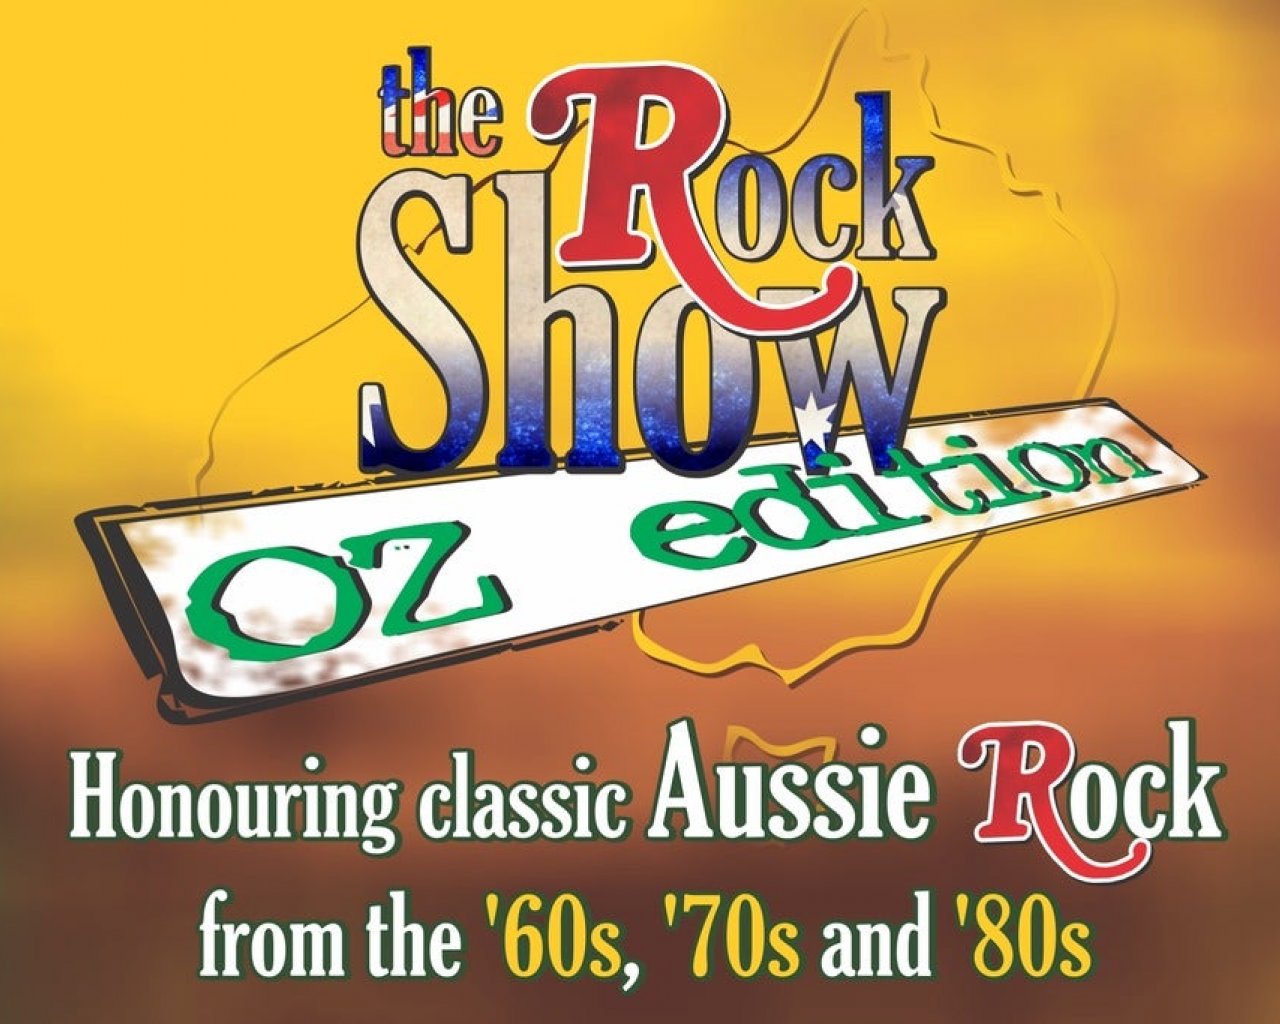 The Rock Show Oz Edition